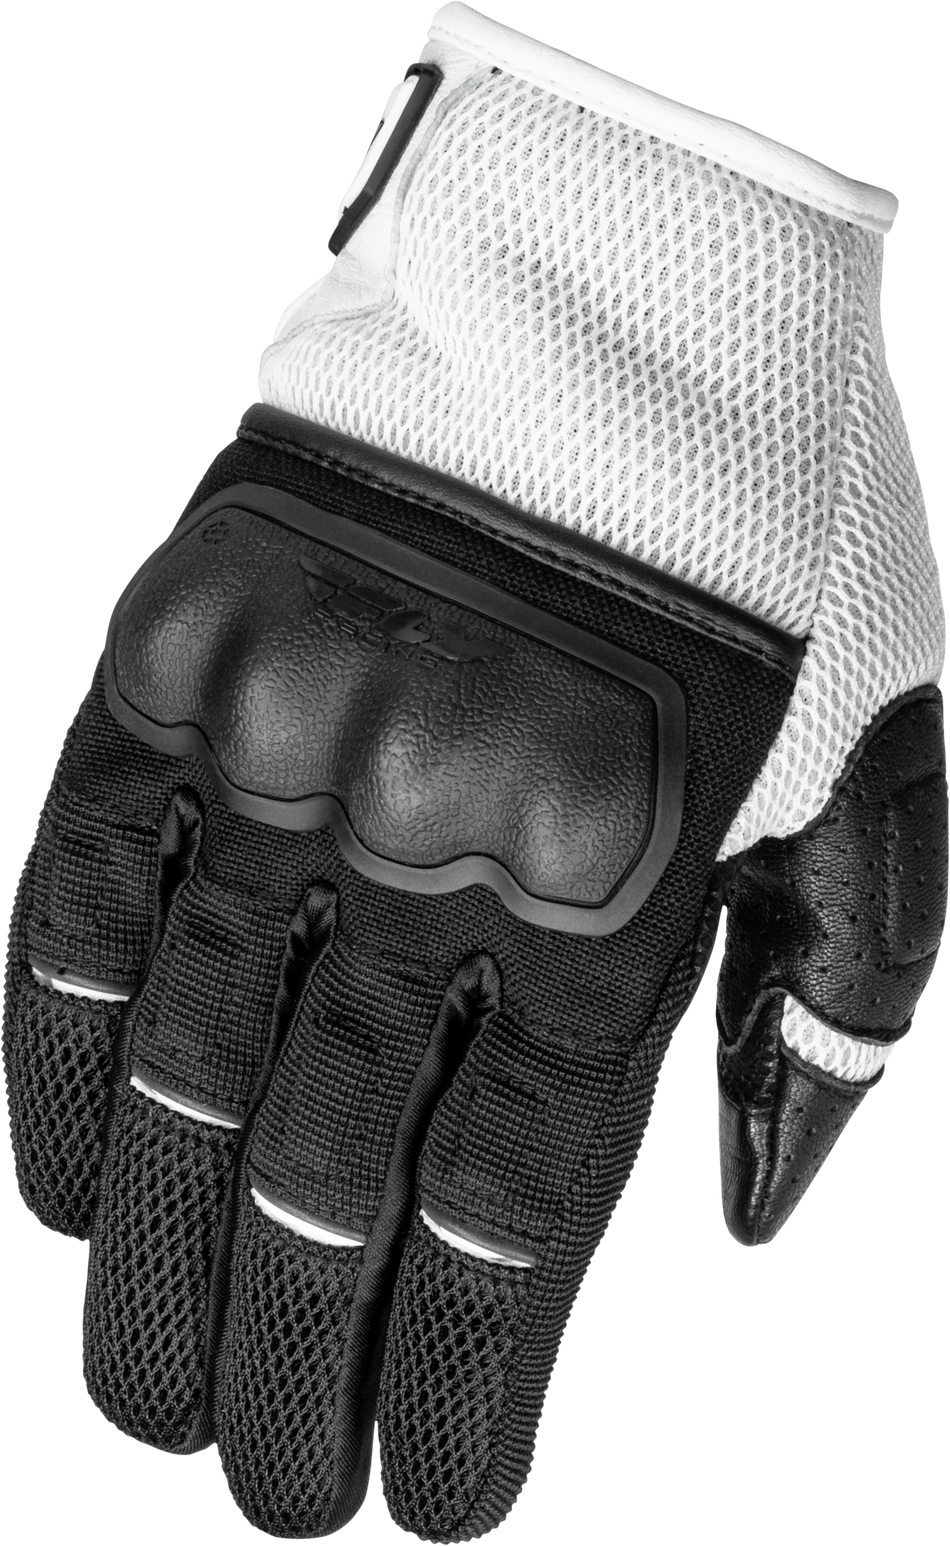 FLY RACING Women's Coolpro Force Gloves Black/White Sm 476-6301S